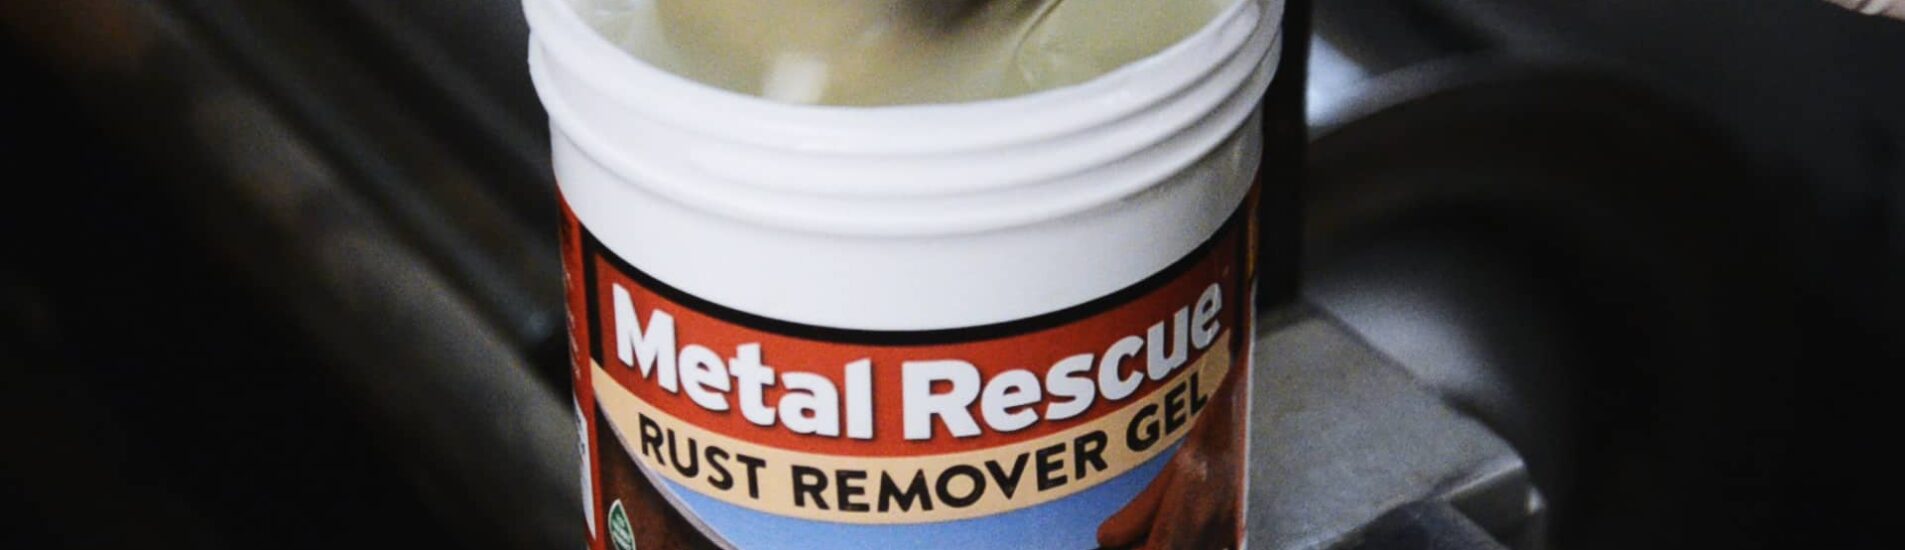 Brushed dipped into Metal Rescue Rust Remover GEL